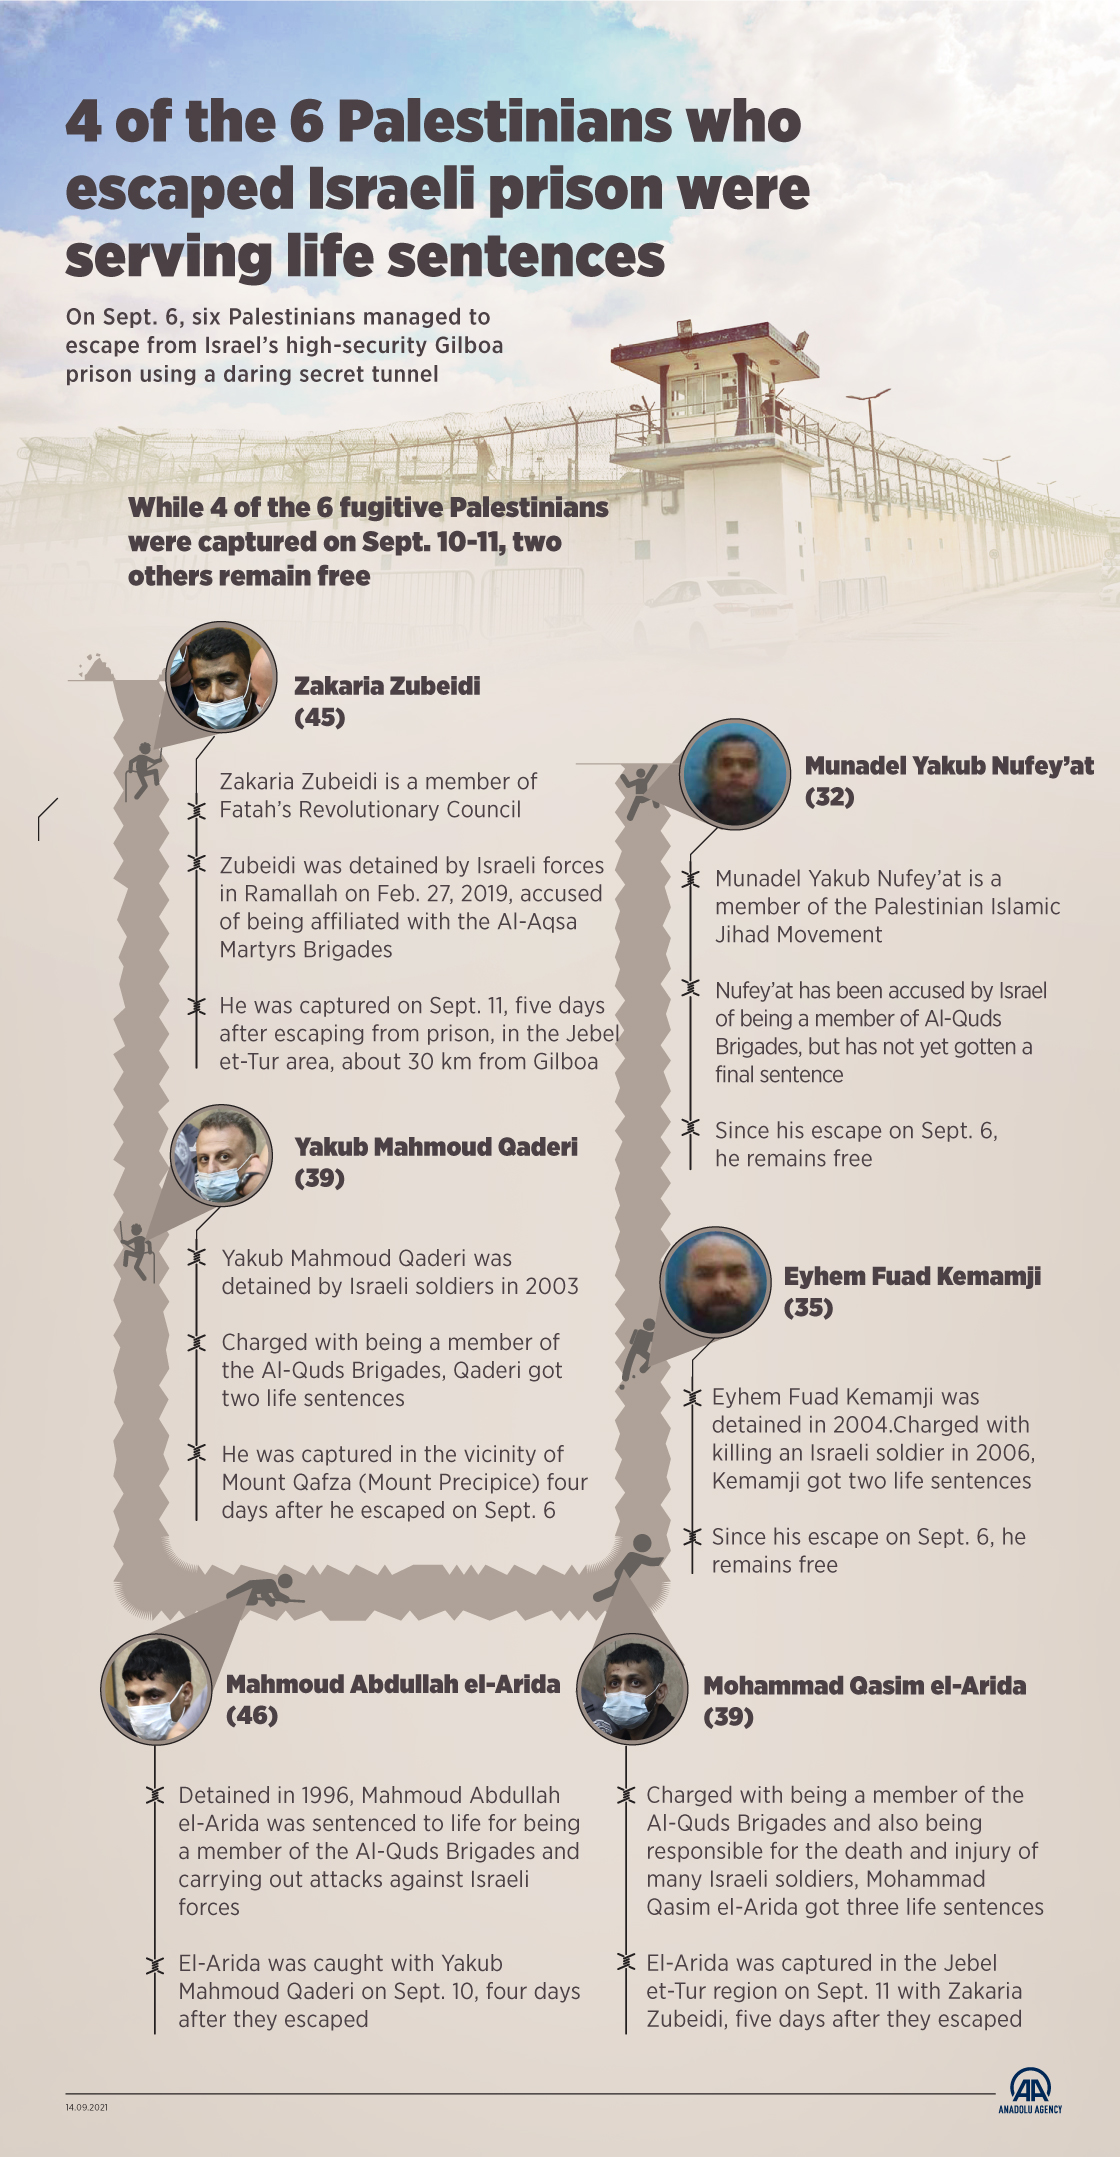 4 of the 6 Palestinians who escaped Israeli prison were serving life sentences 